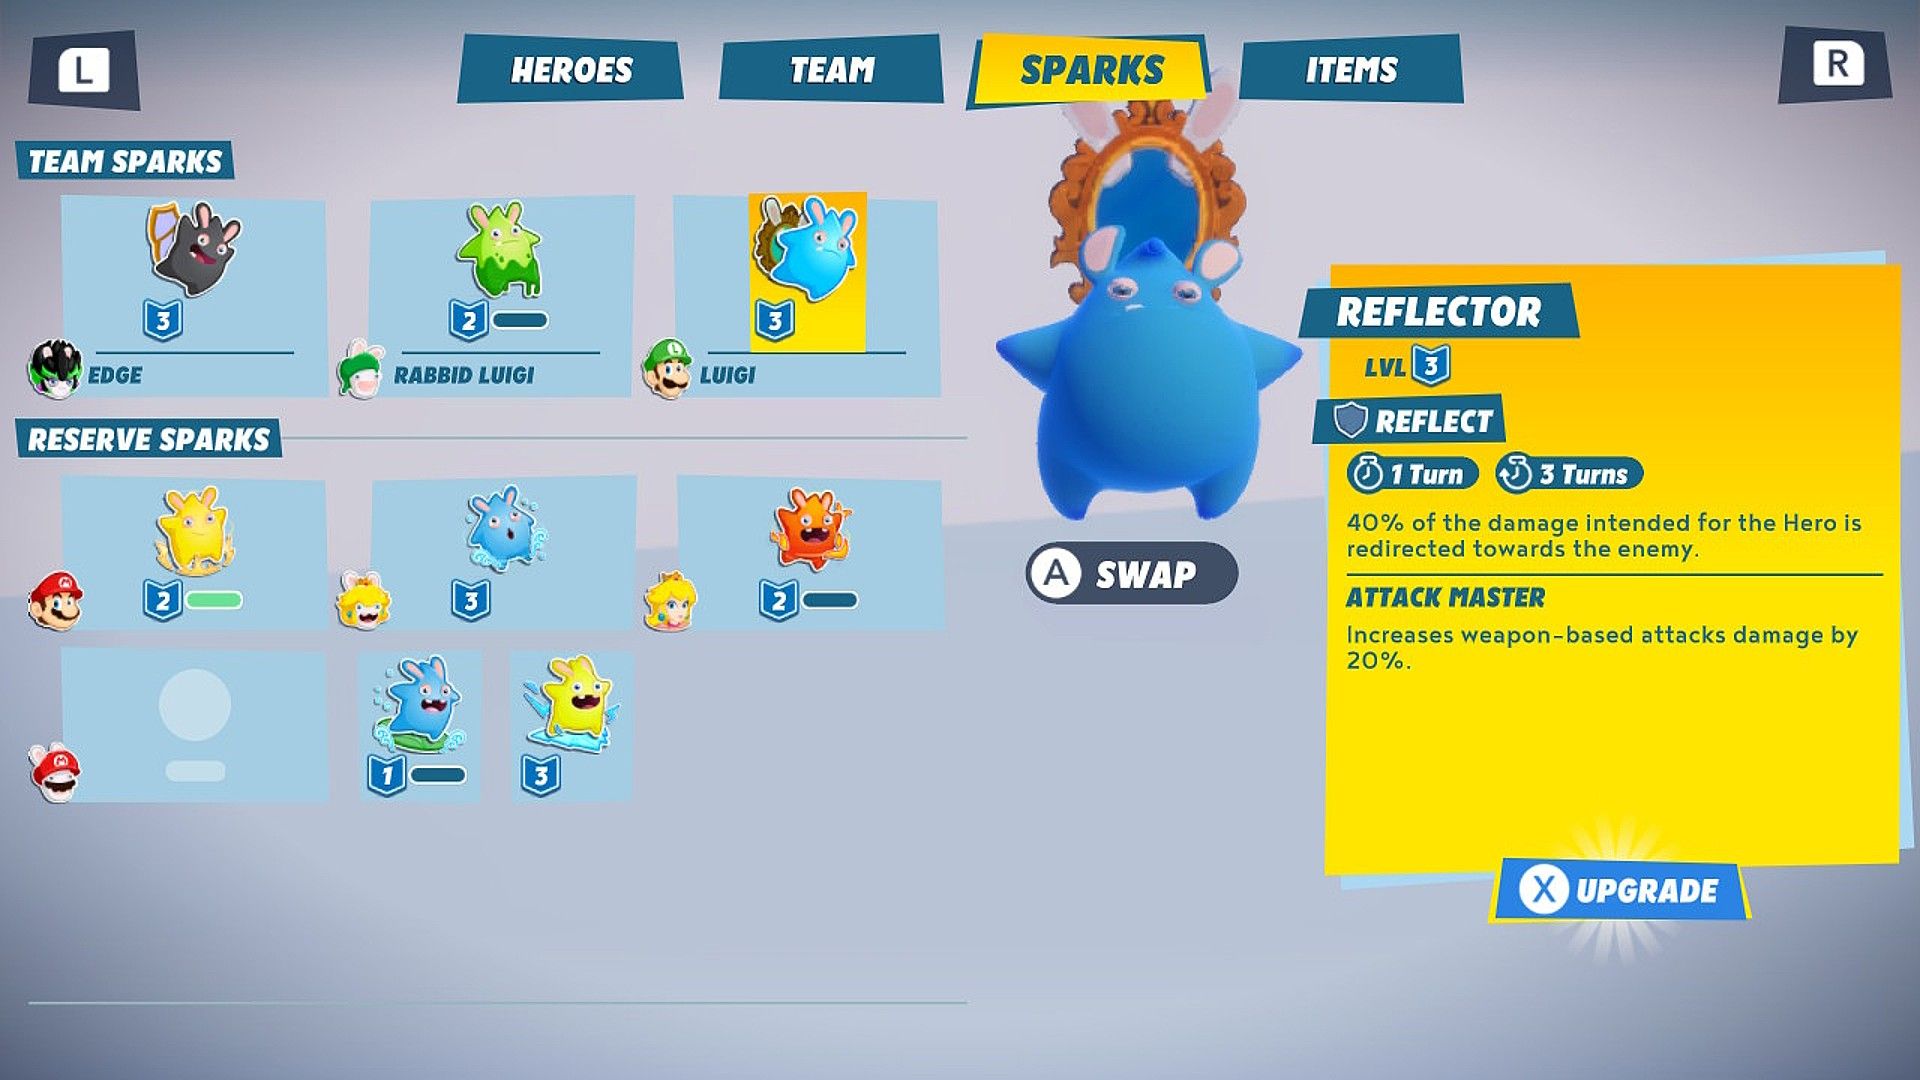 Reflector is one of the best protector Sparks you can collect in Mario + Rabbids Sparks Of Hope